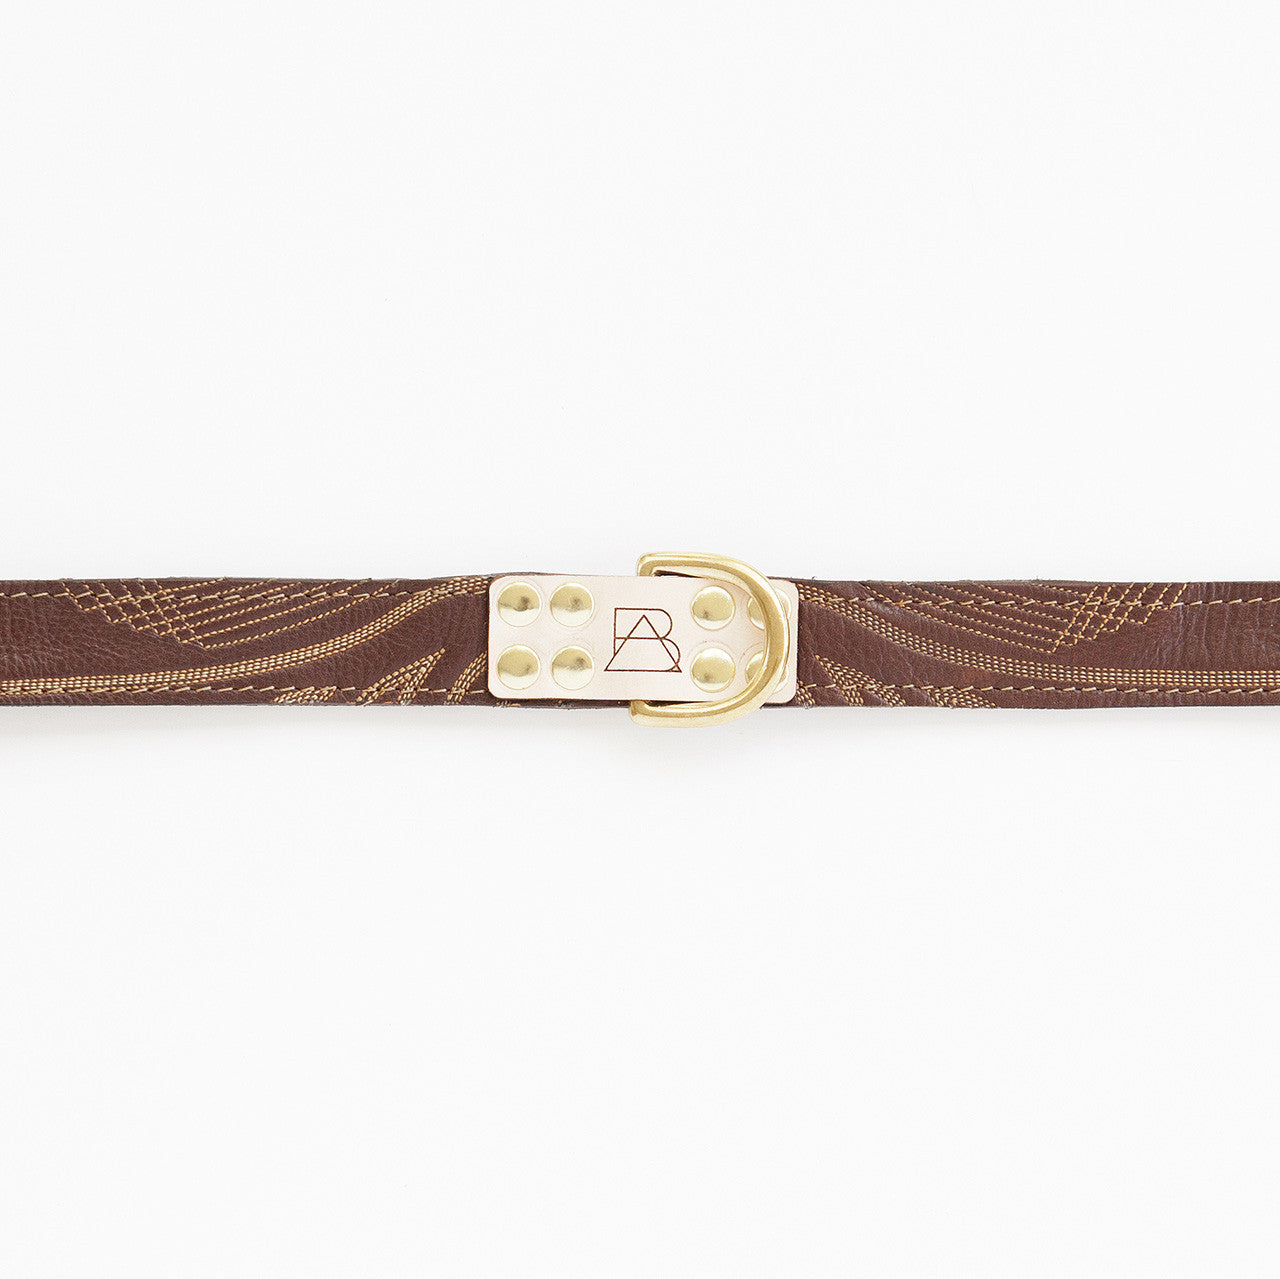 Camo Dog Collar with Brown Leather + Ivory Stitching